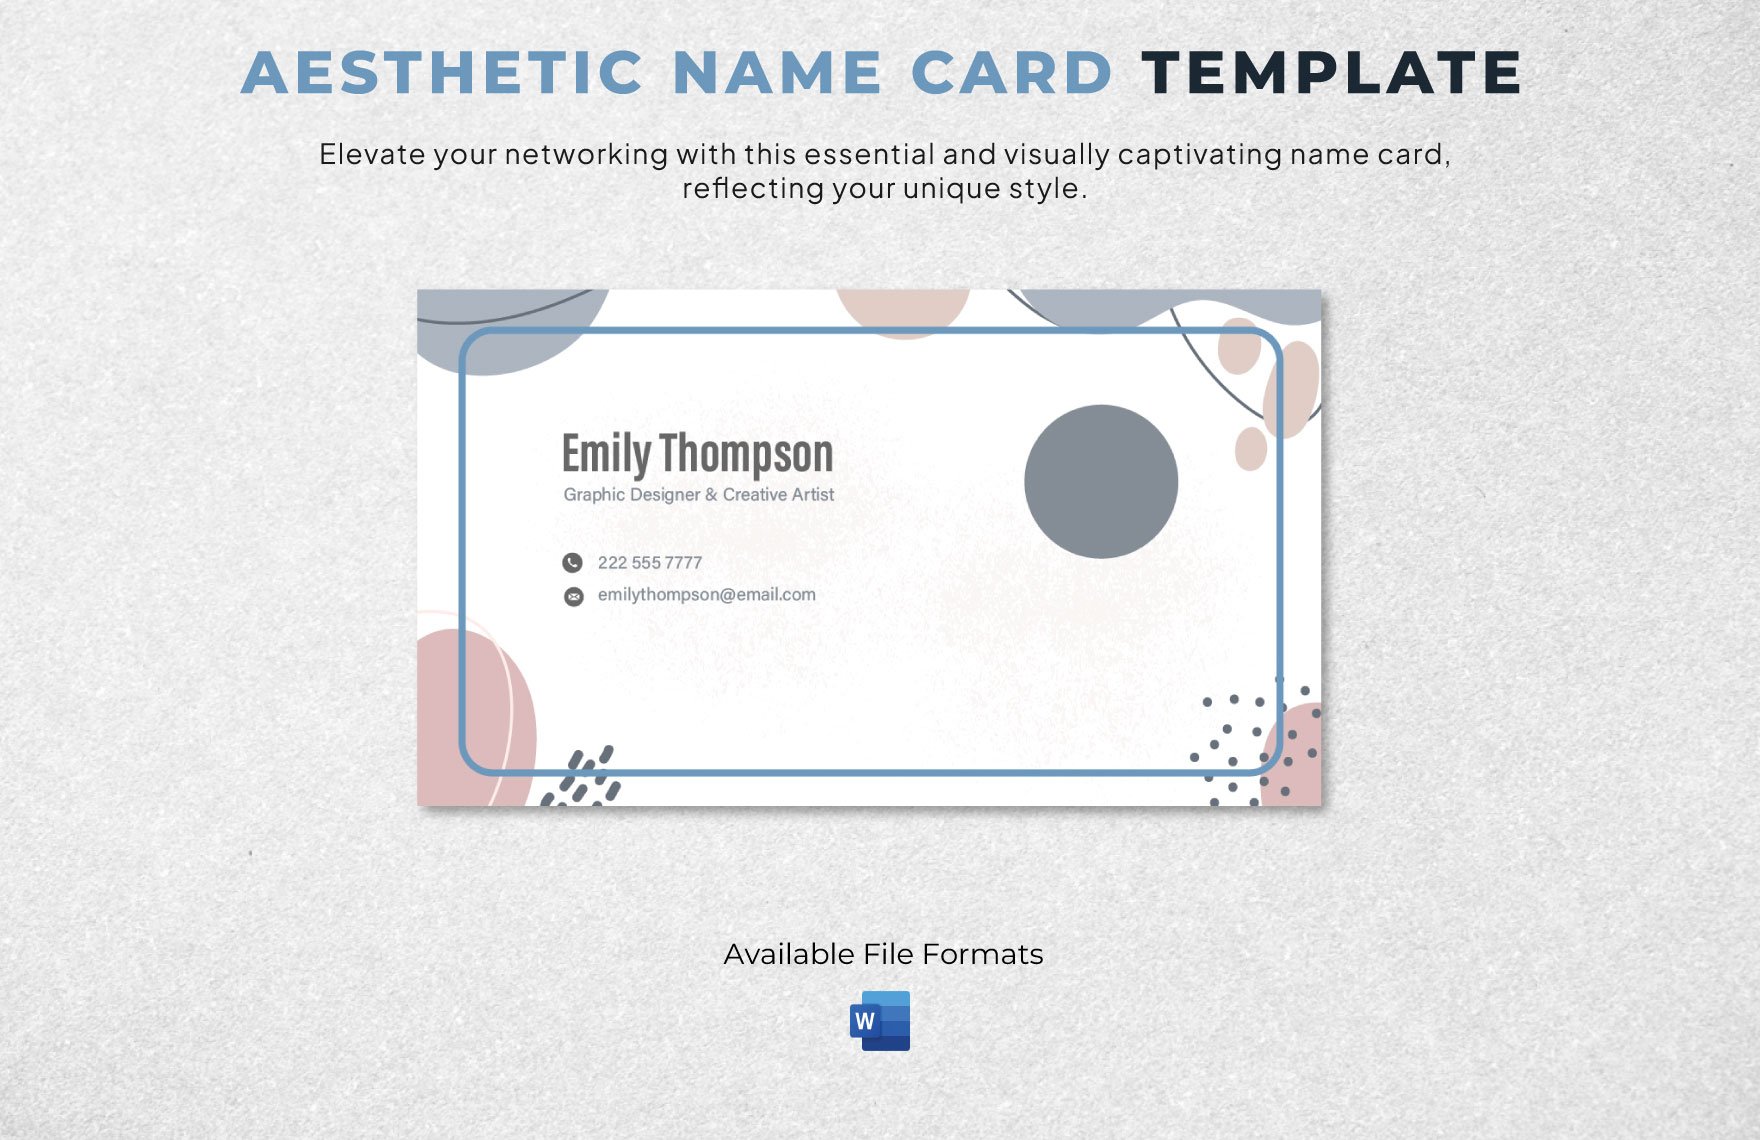 Free Aesthetic Name Card Template in Word